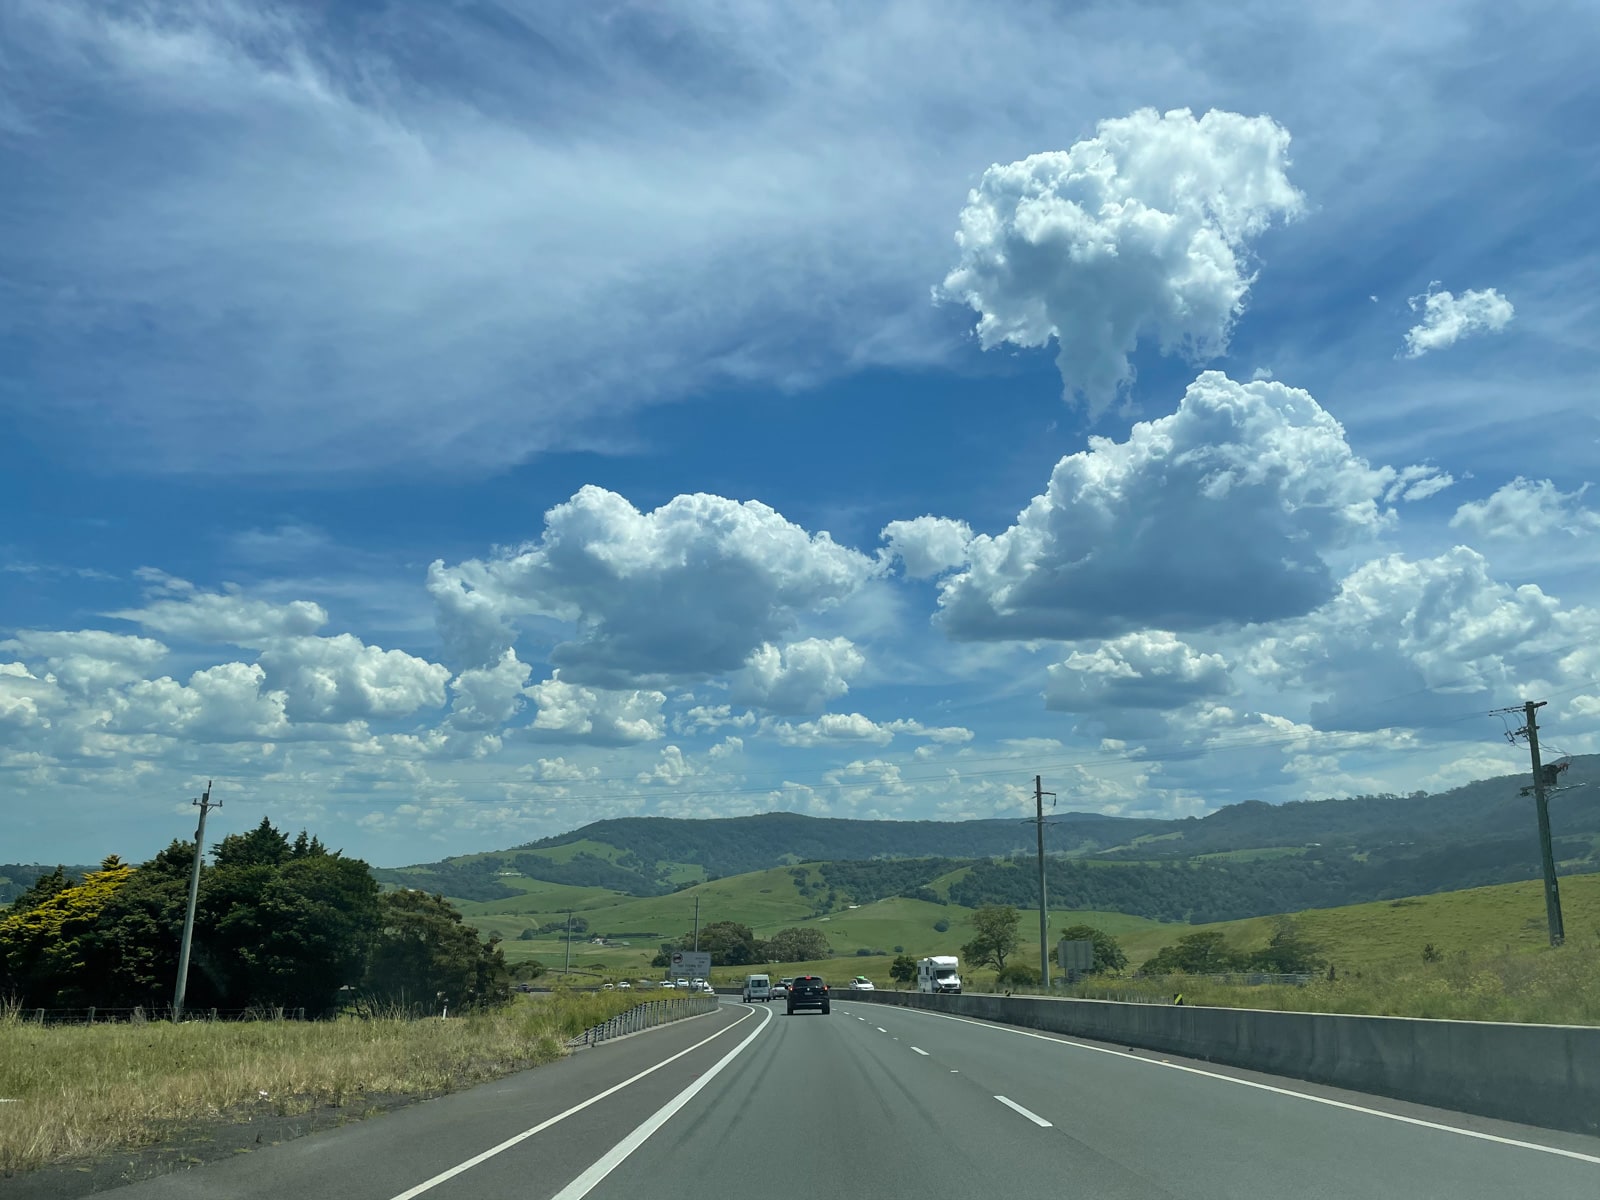 A view of a stretch of road during the day. The sky has some clouds in it. The road is a motorway with some cars on the road